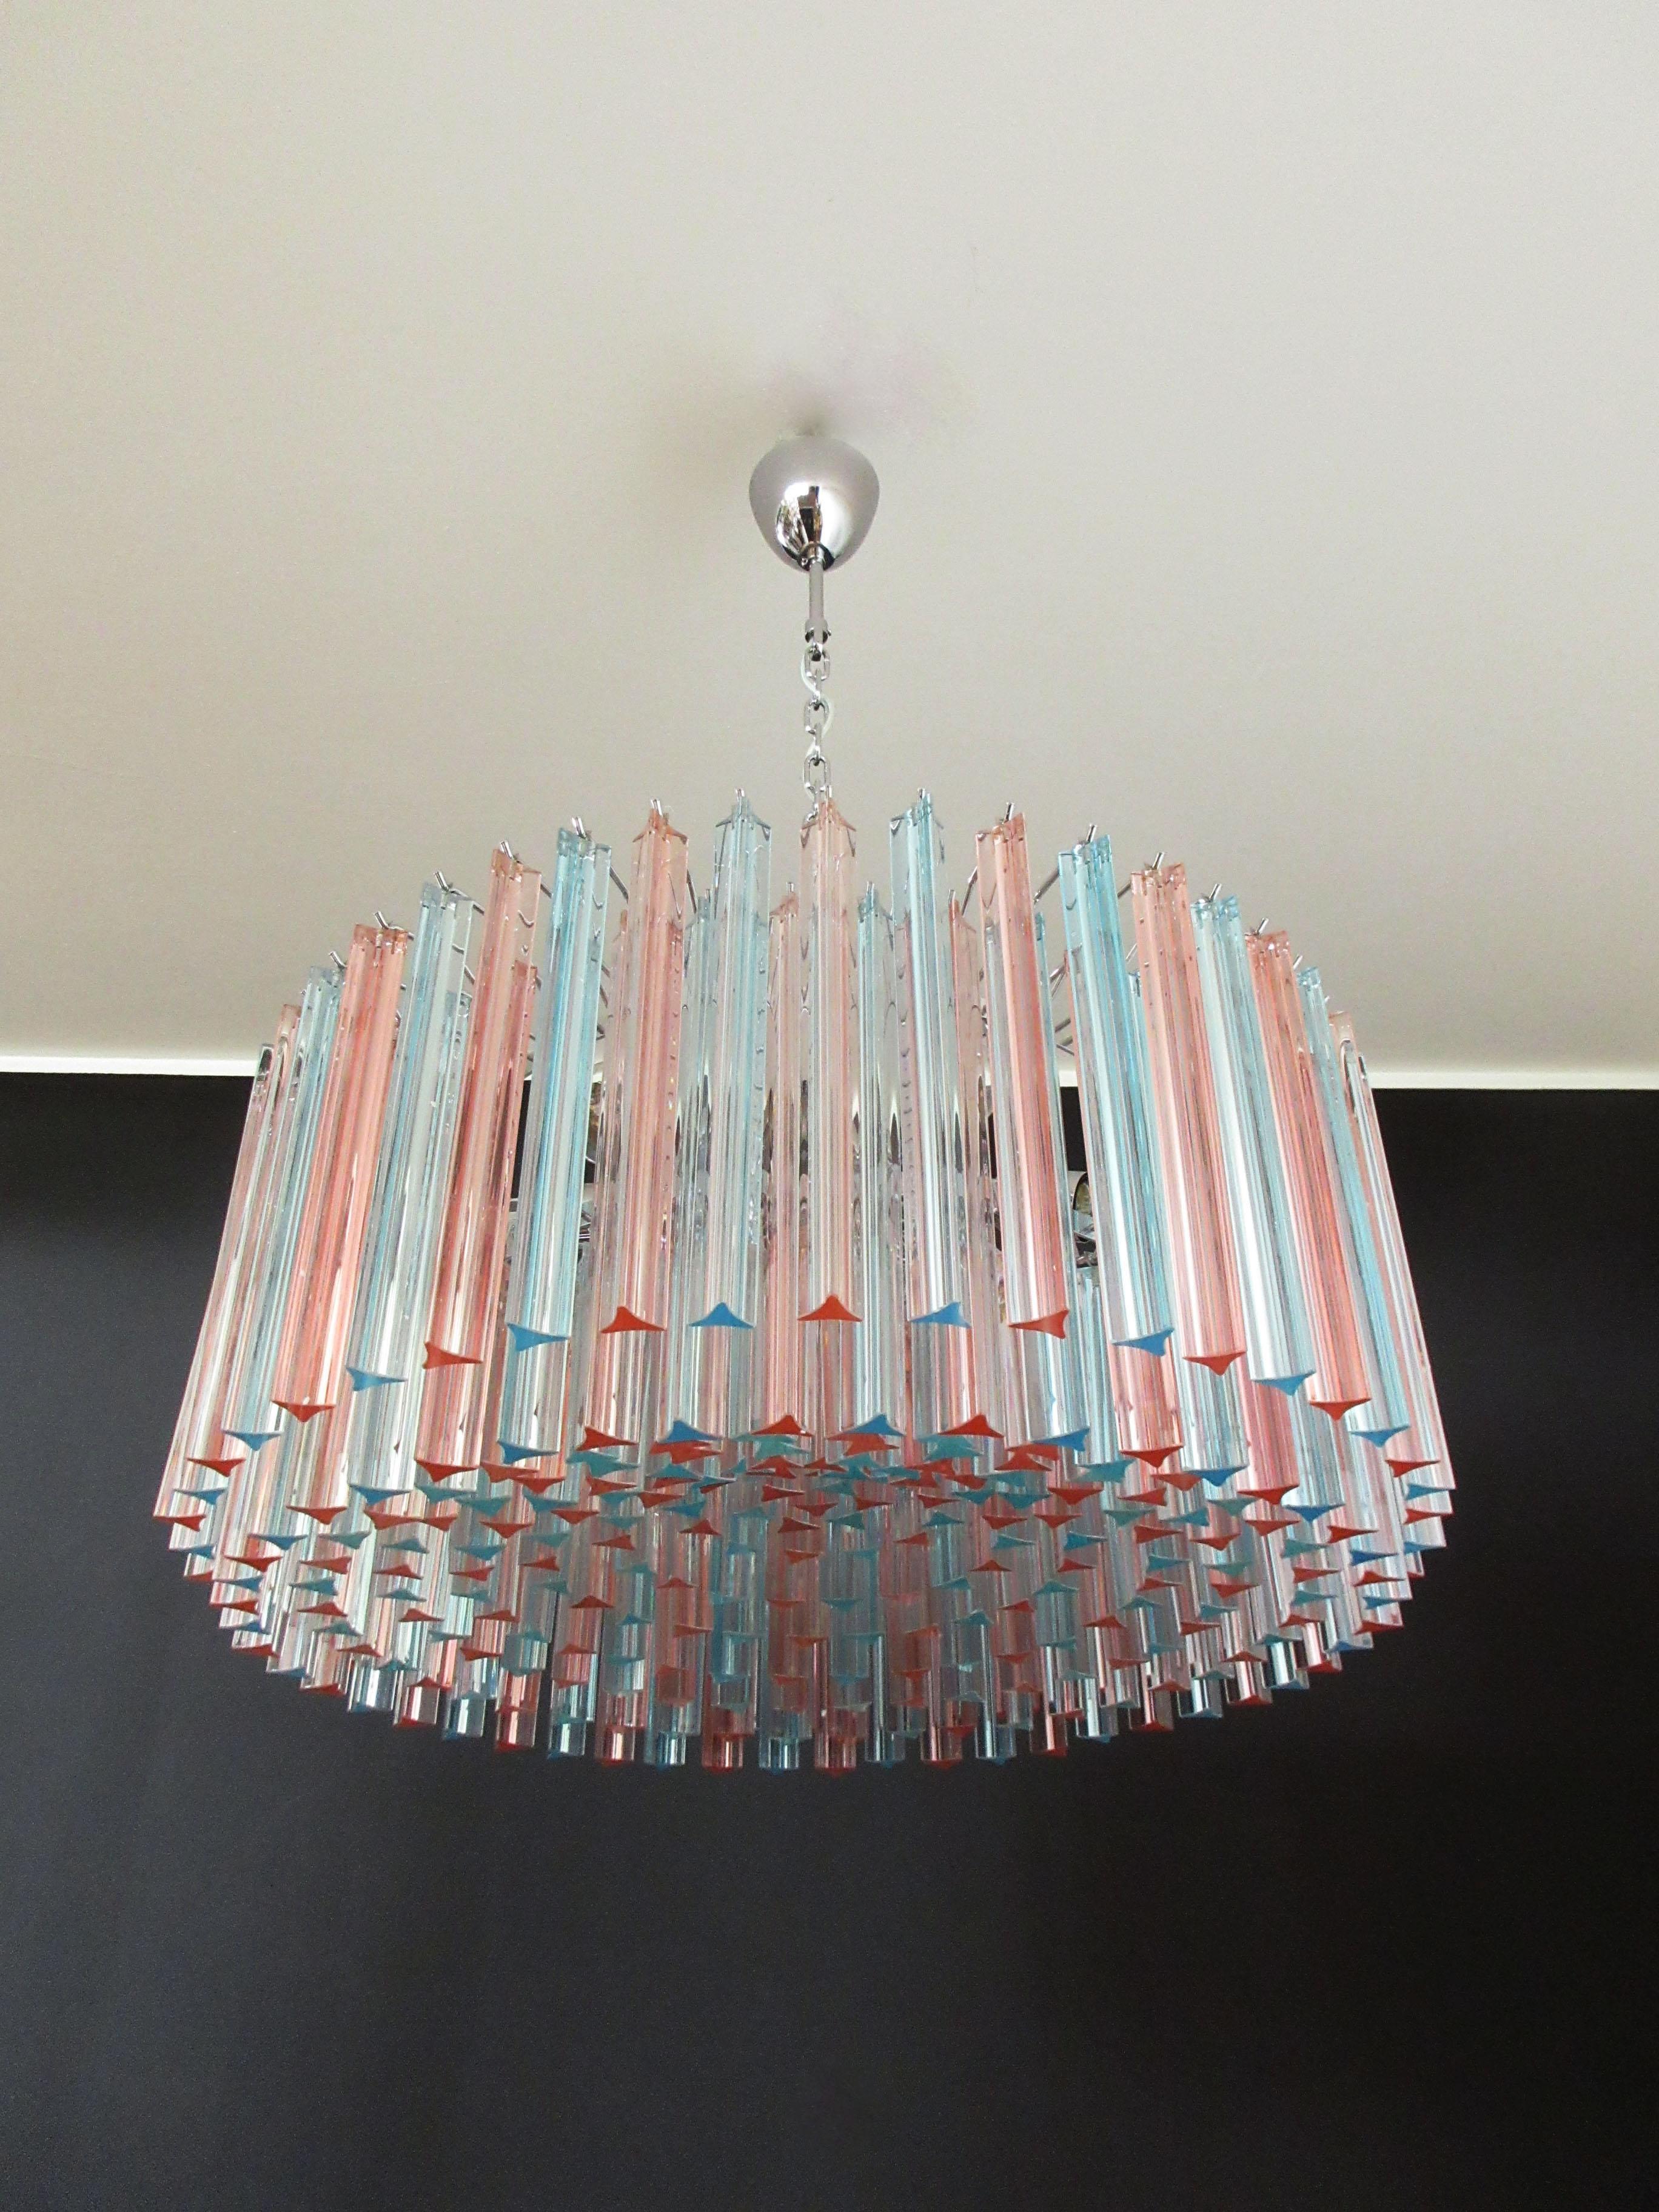 A magnificent Murano glass chandelier, 265 pink and blue triedri on crome frame. This large midcentury Italian chandelier is truly a timeless classic.
Period: late 20th century
Dimensions: 43.30 inches (110 cm) height with chain; 15.75 inches (40